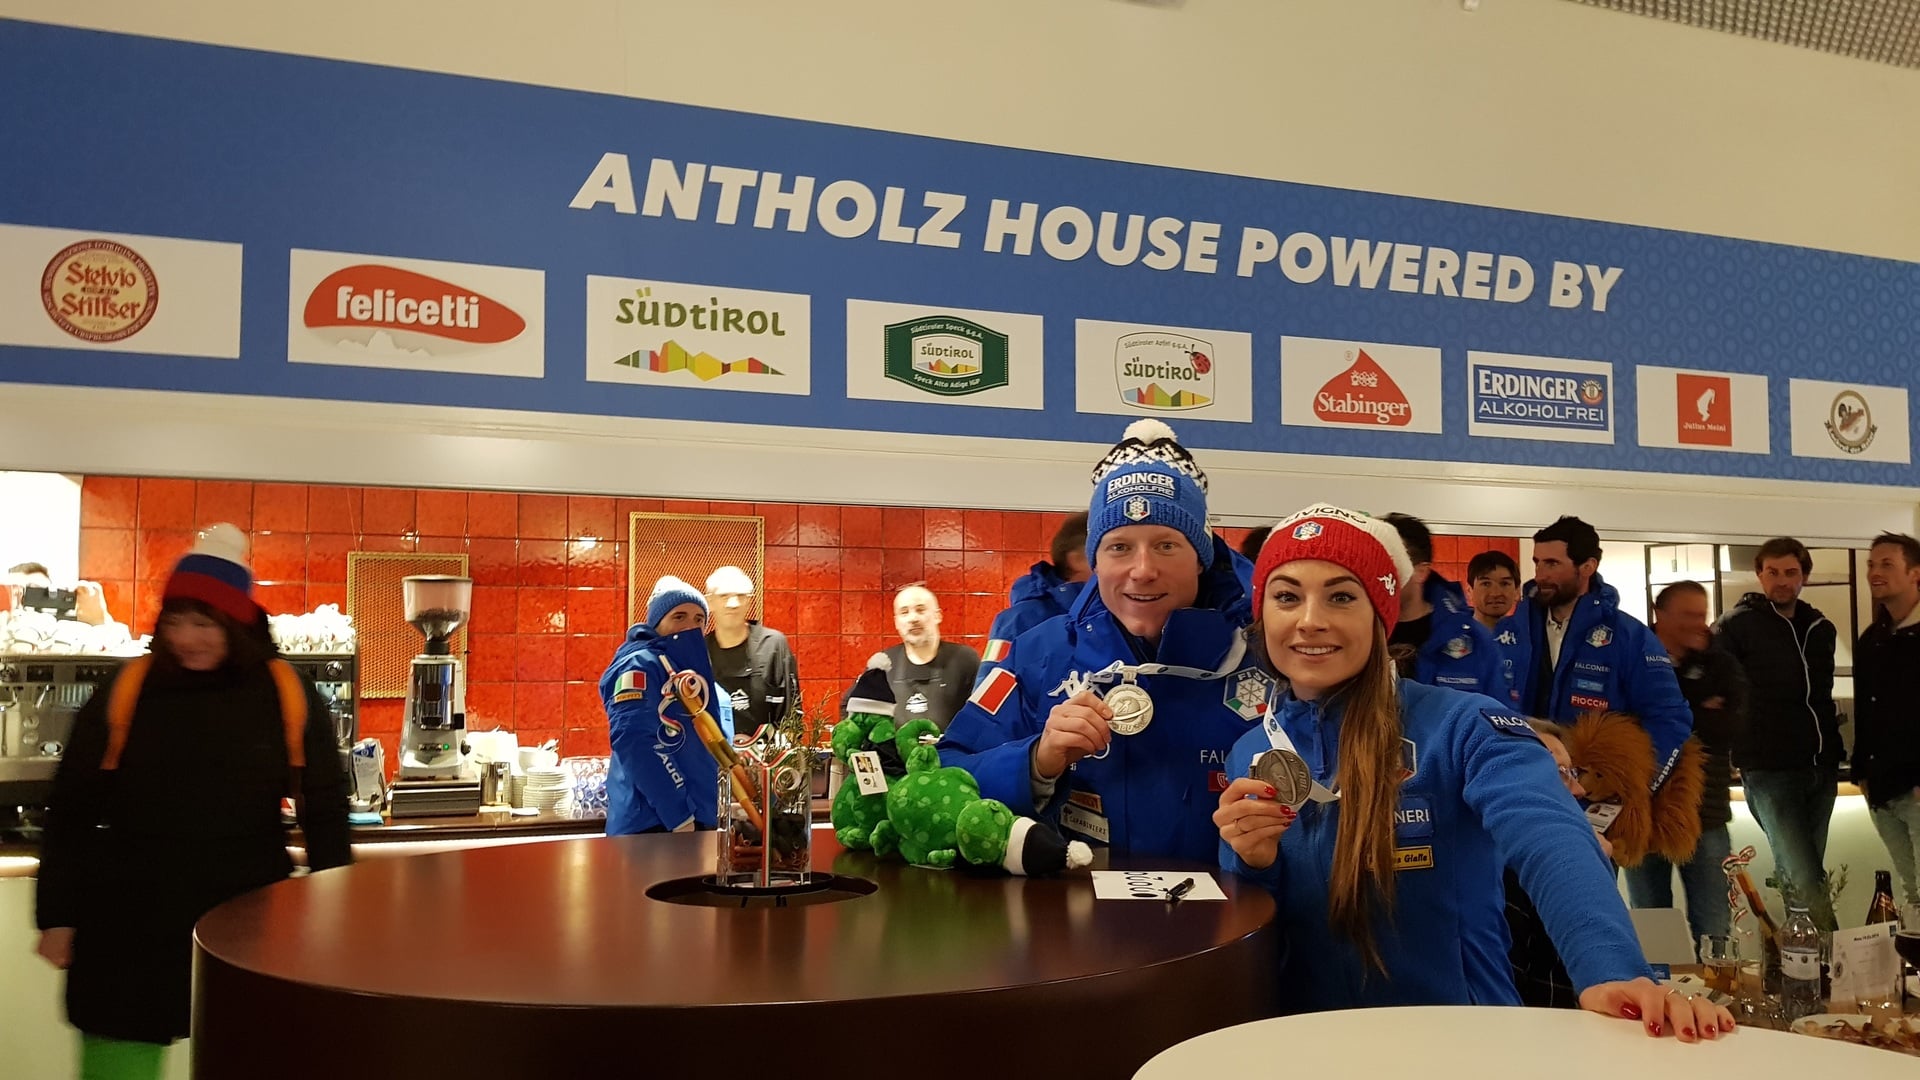 15.03.2019 - Festive atmosphere last night in the Antholz House for the whole Italian team and the staff of the restaurant